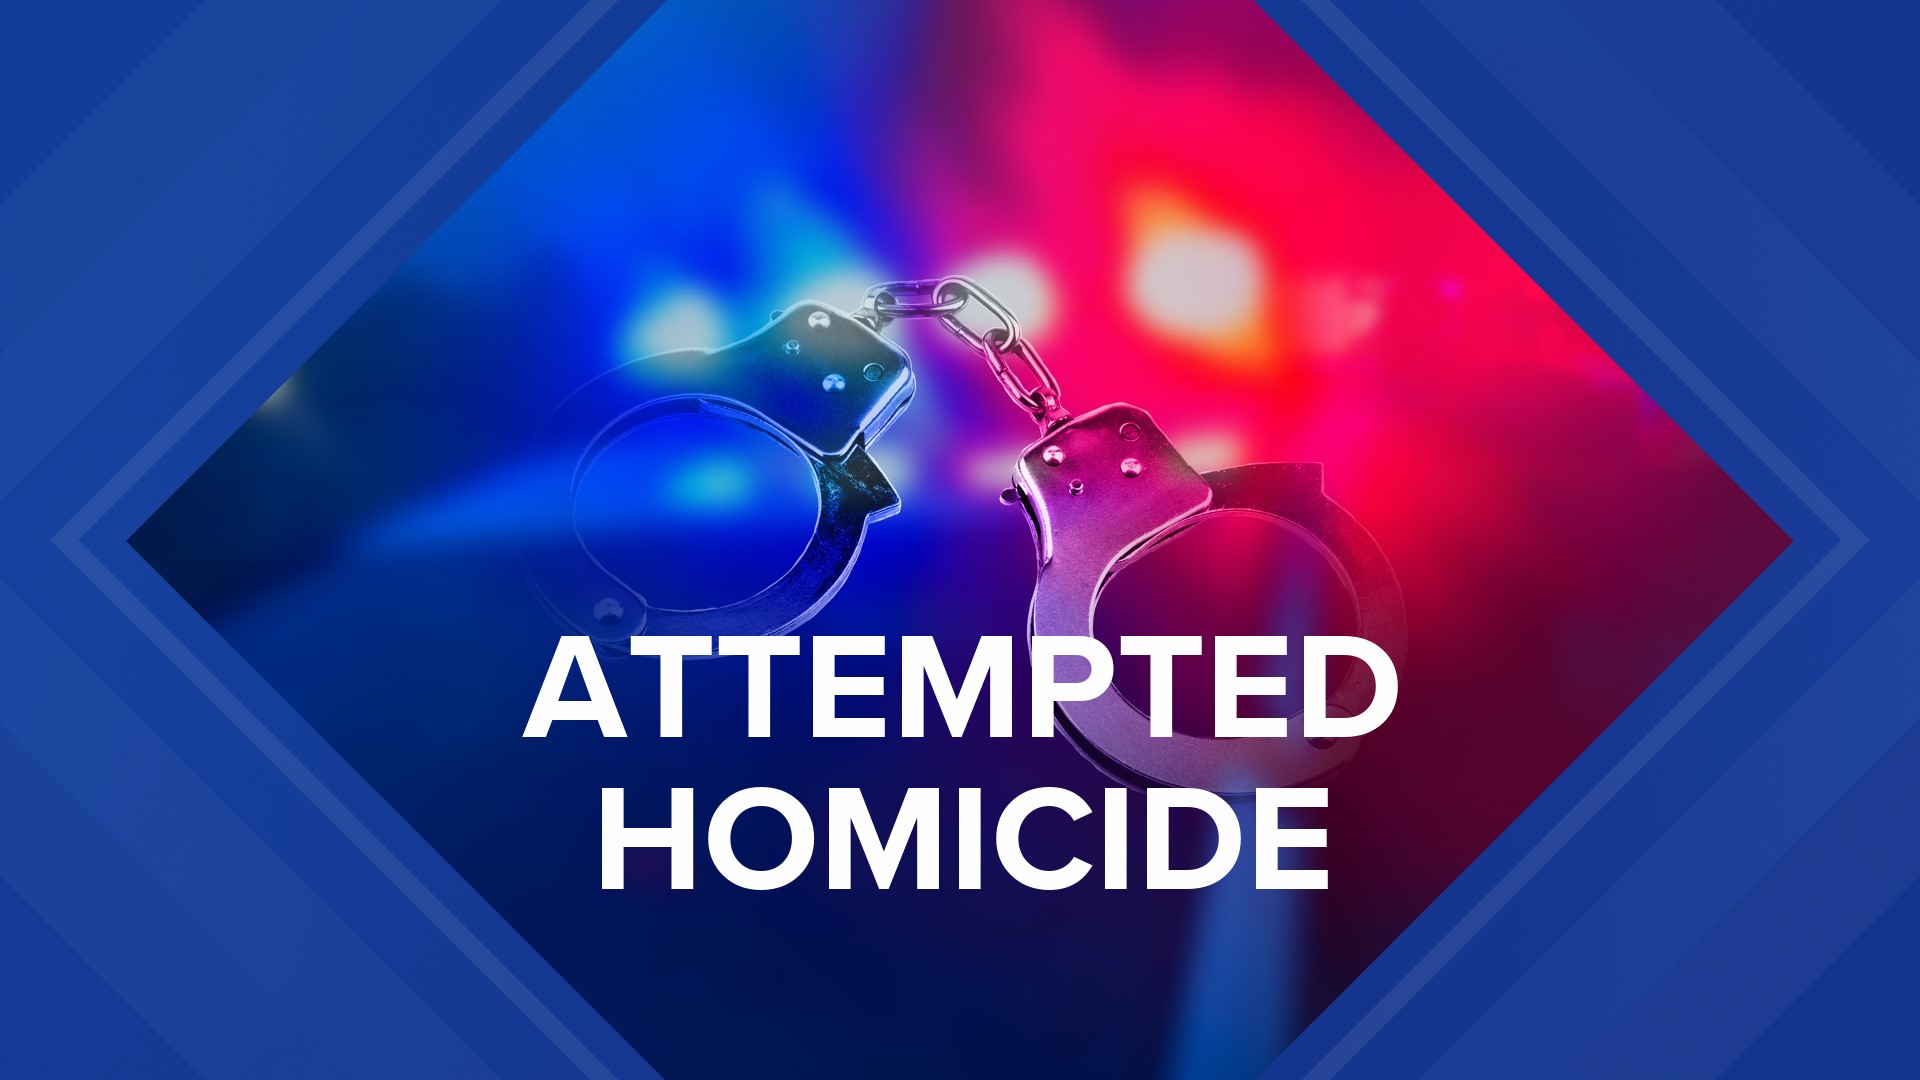 According to state police, the man fired several shots at a group of people at Resurrection Cemetery near Montoursville.